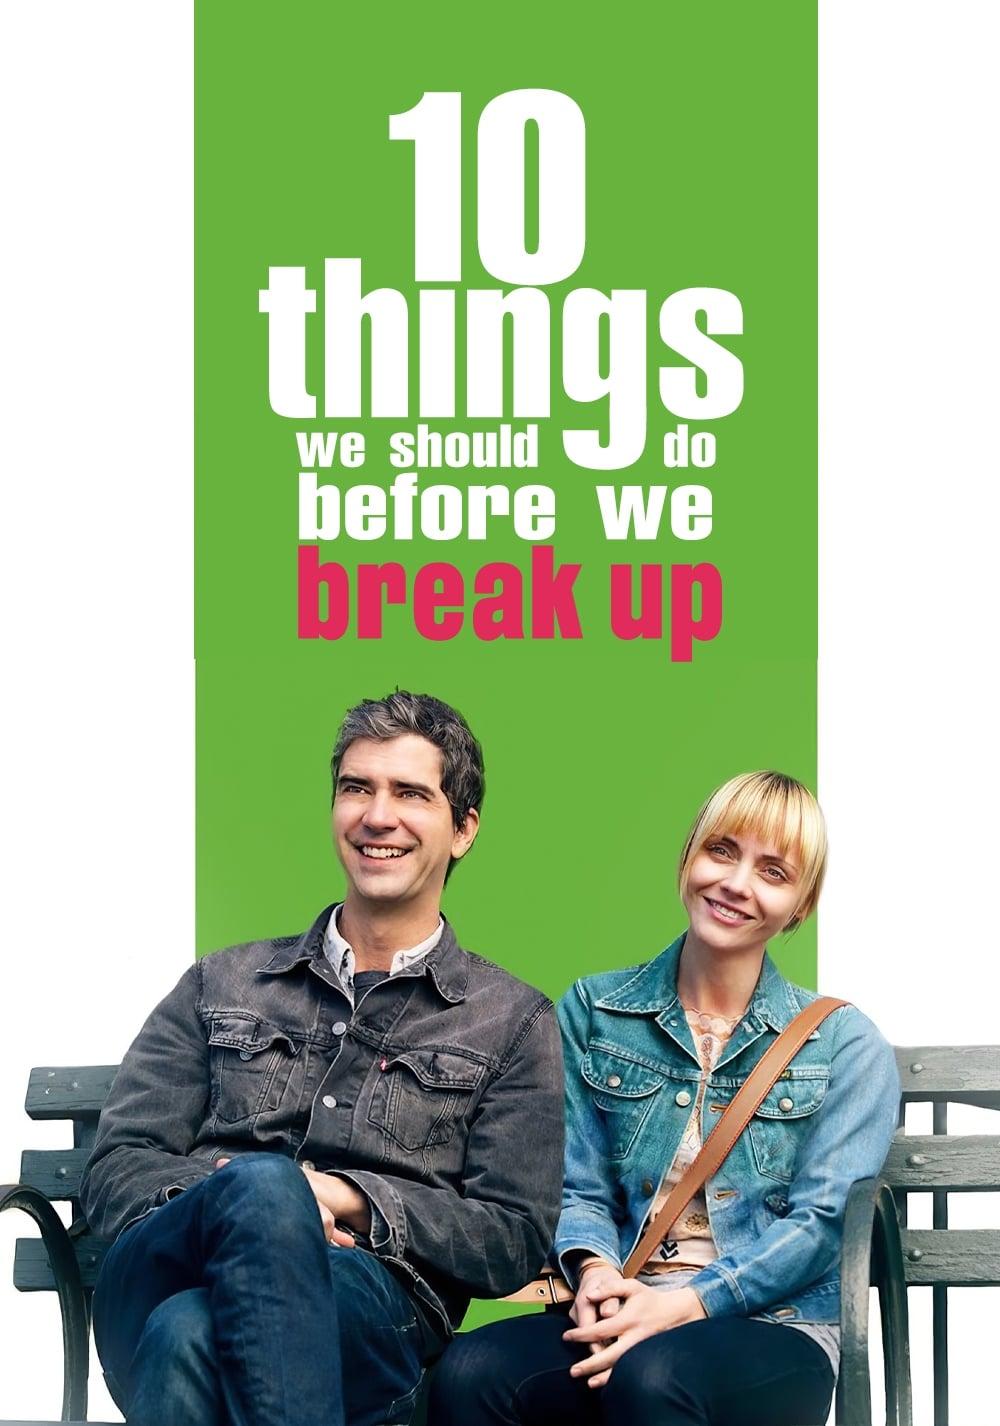 10 Things We Should Do Before We Break Up poster